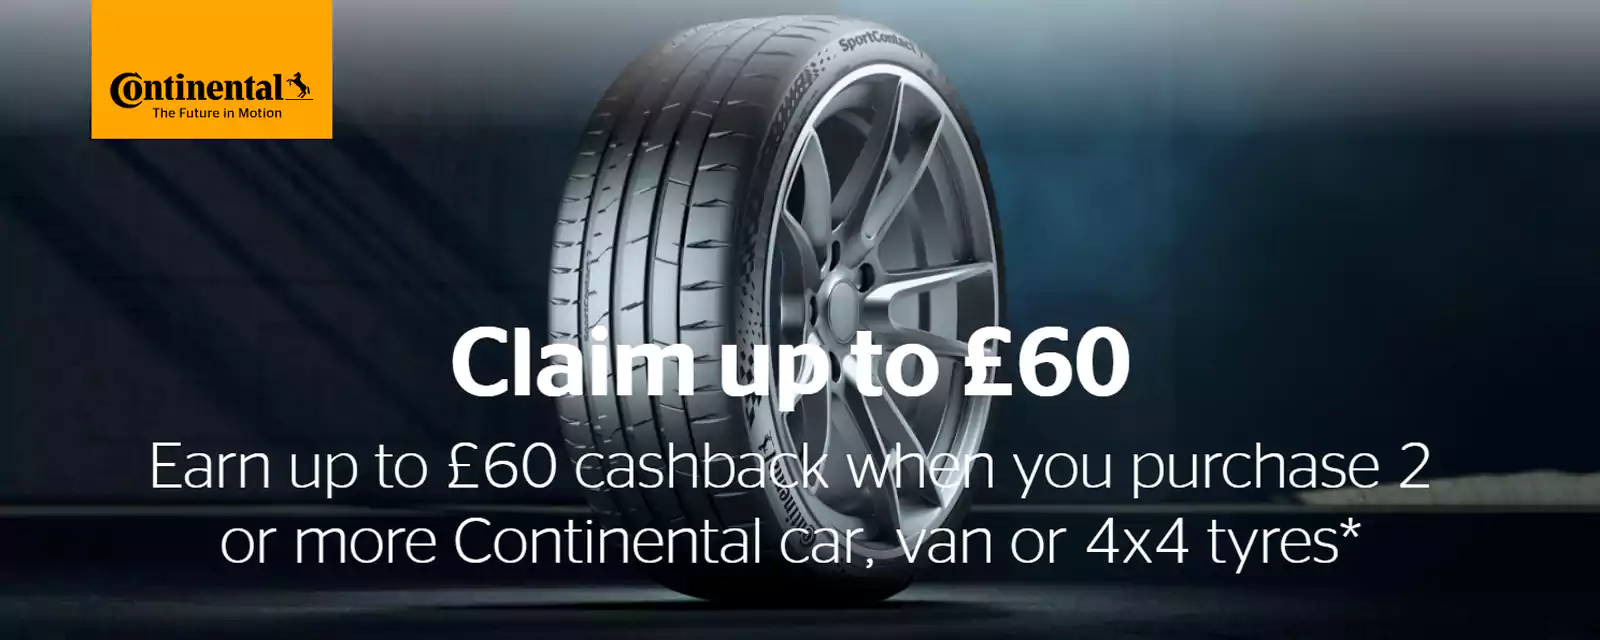 Continental tyres offer